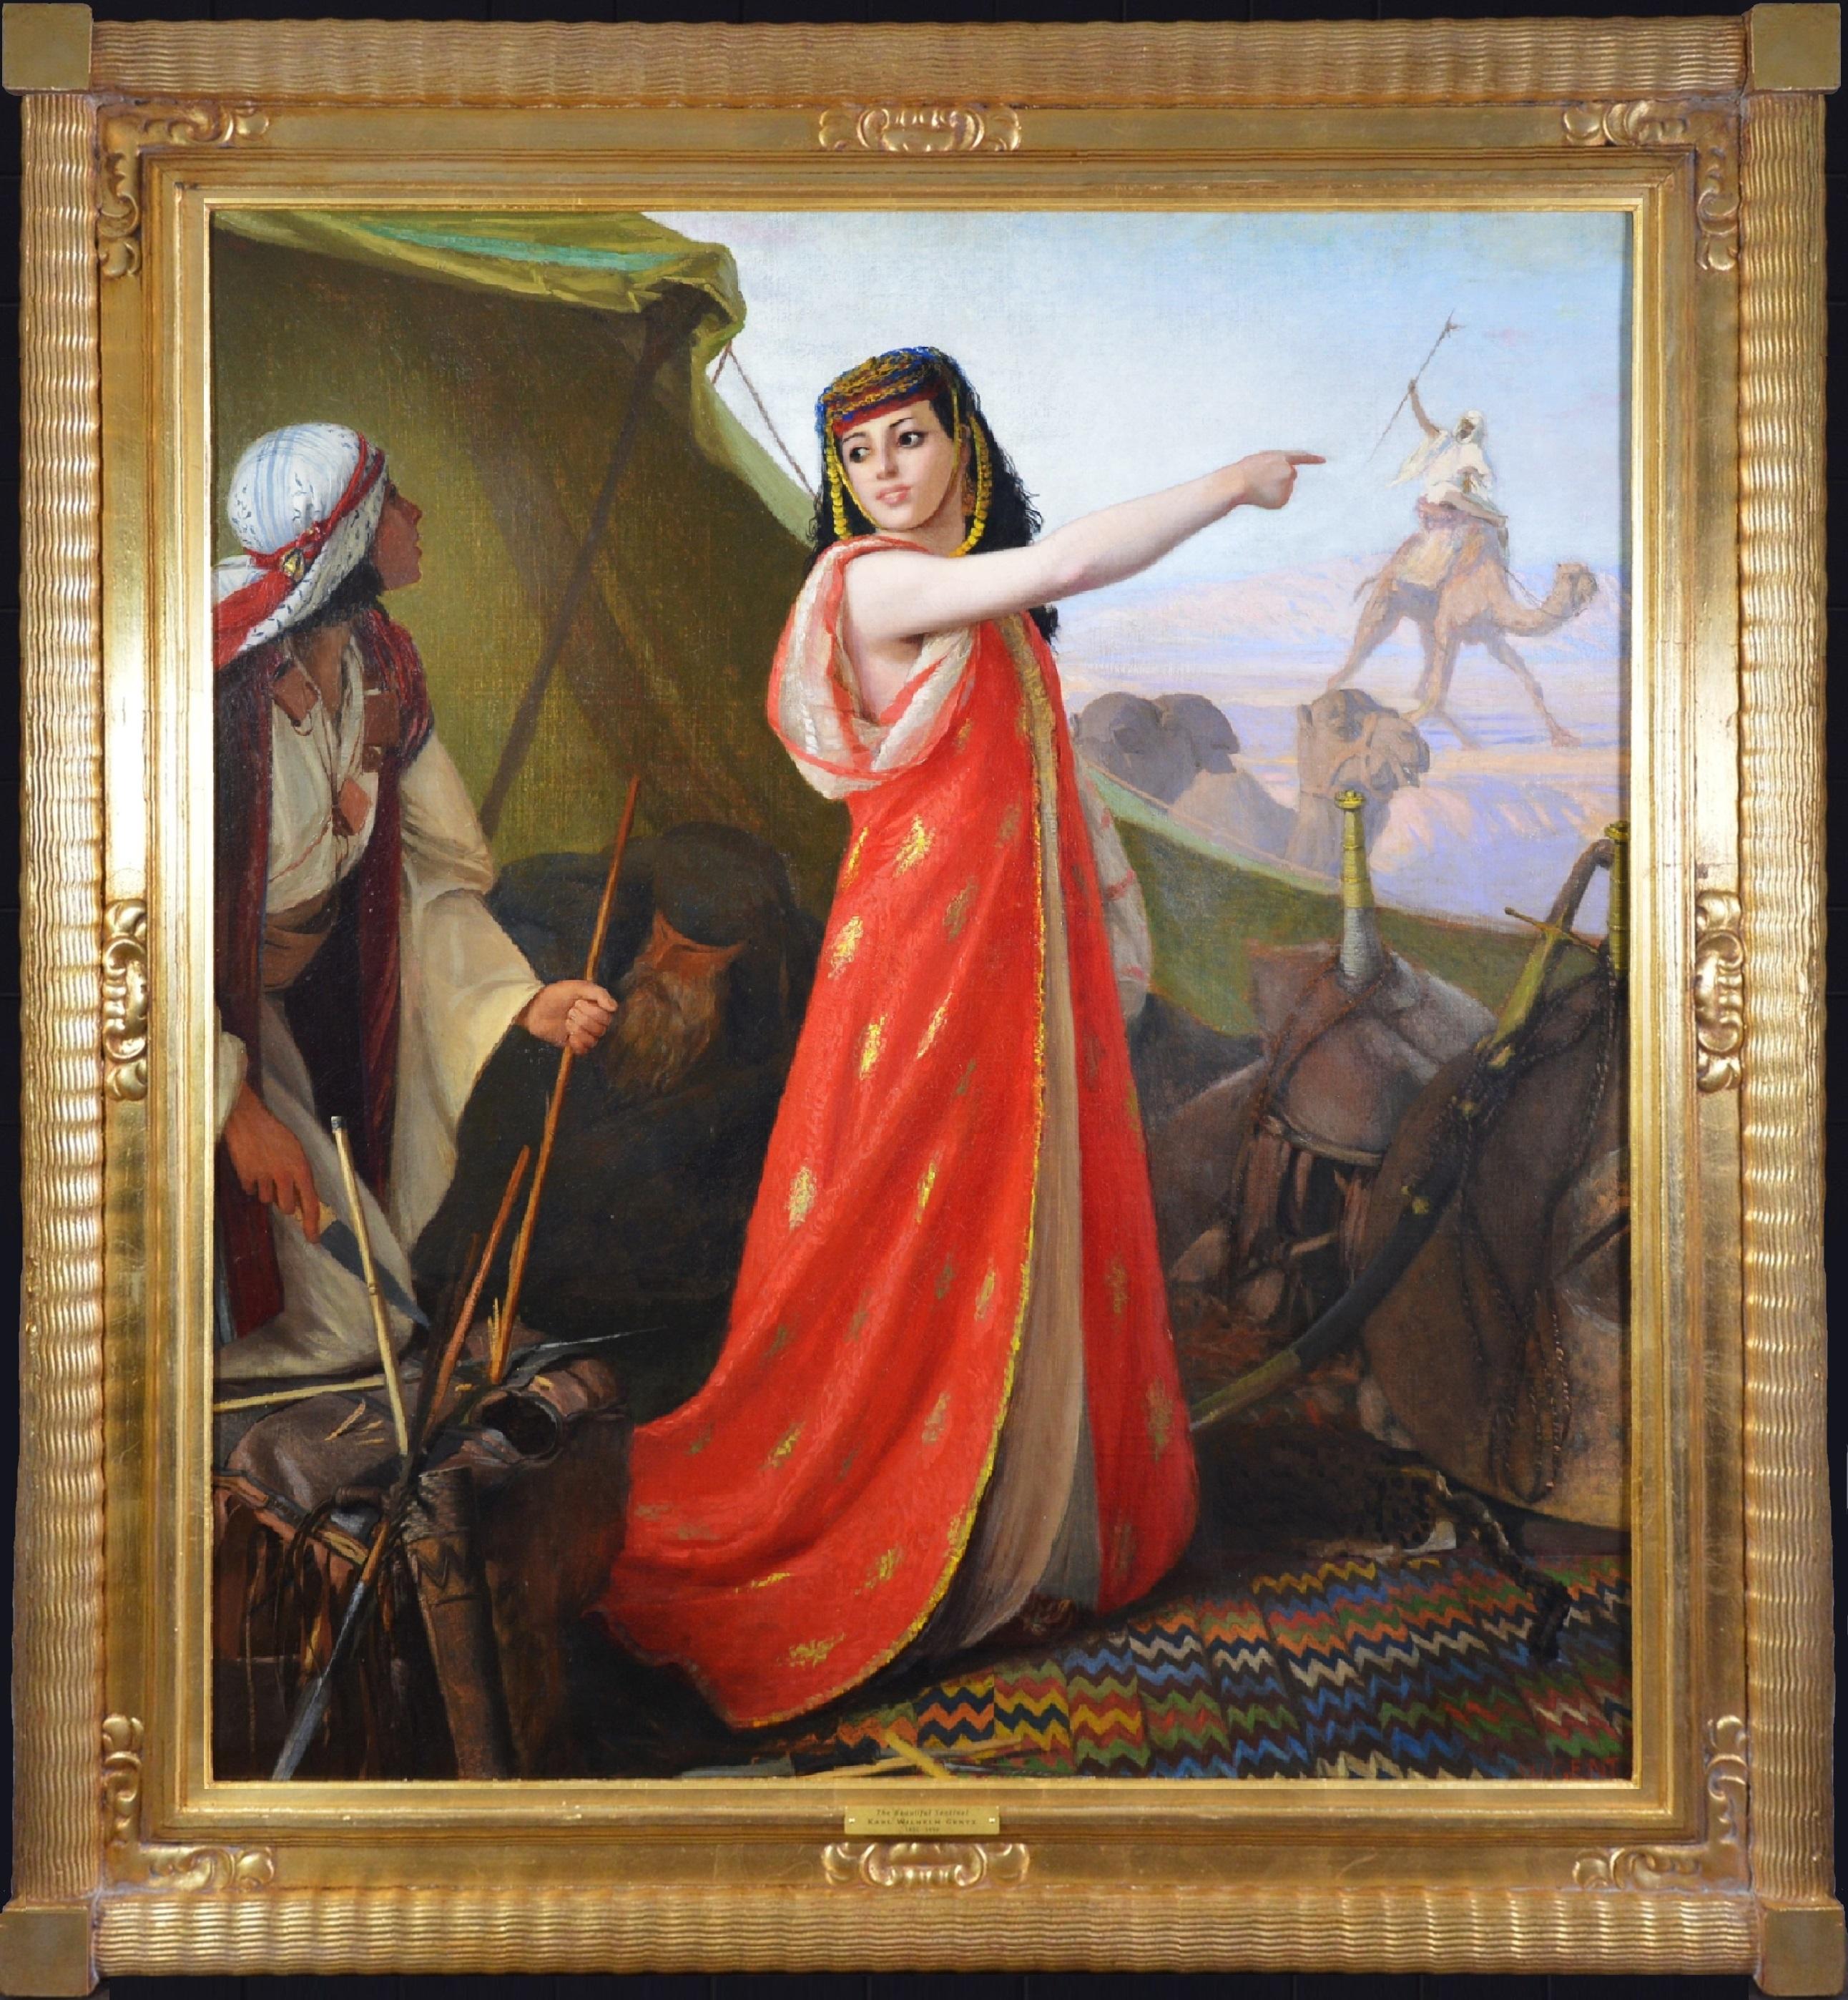 ‘The Beautiful Sentinel’ by Karl Wilhelm Gentz (German, 1822-1890). This large fine 19th century oil painting is signed by the artist and hangs in a gilded Orientalist frame.

As with all the paintings we sell it is offered in the finest condition